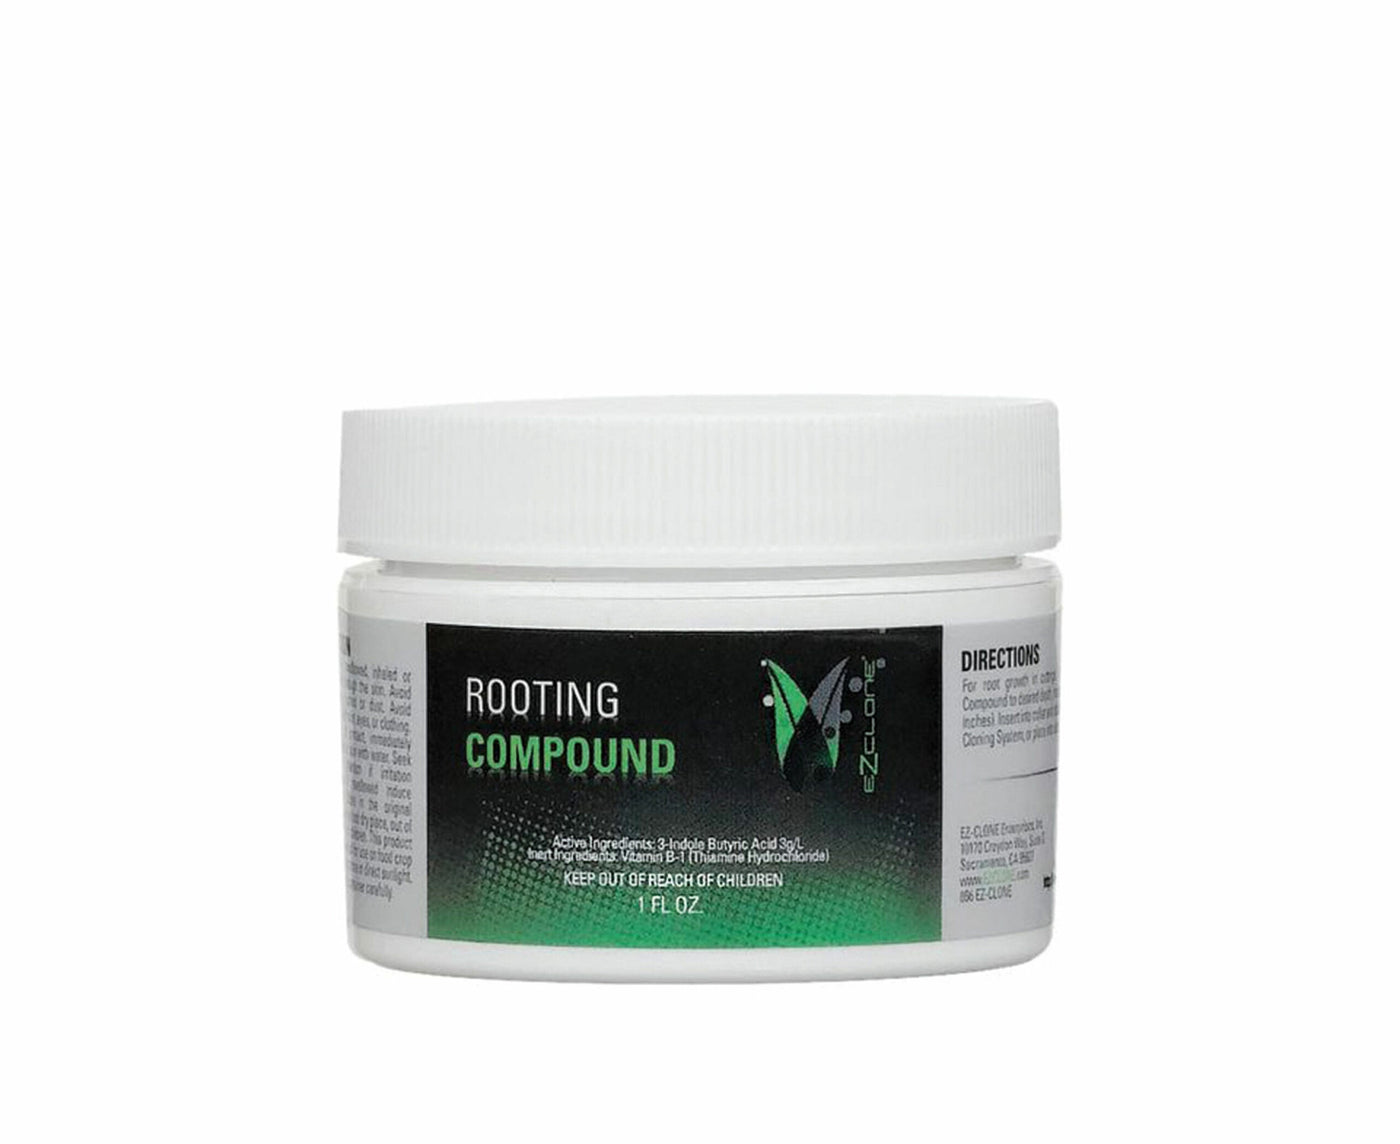 EZ-CLONE® Rooting Compound